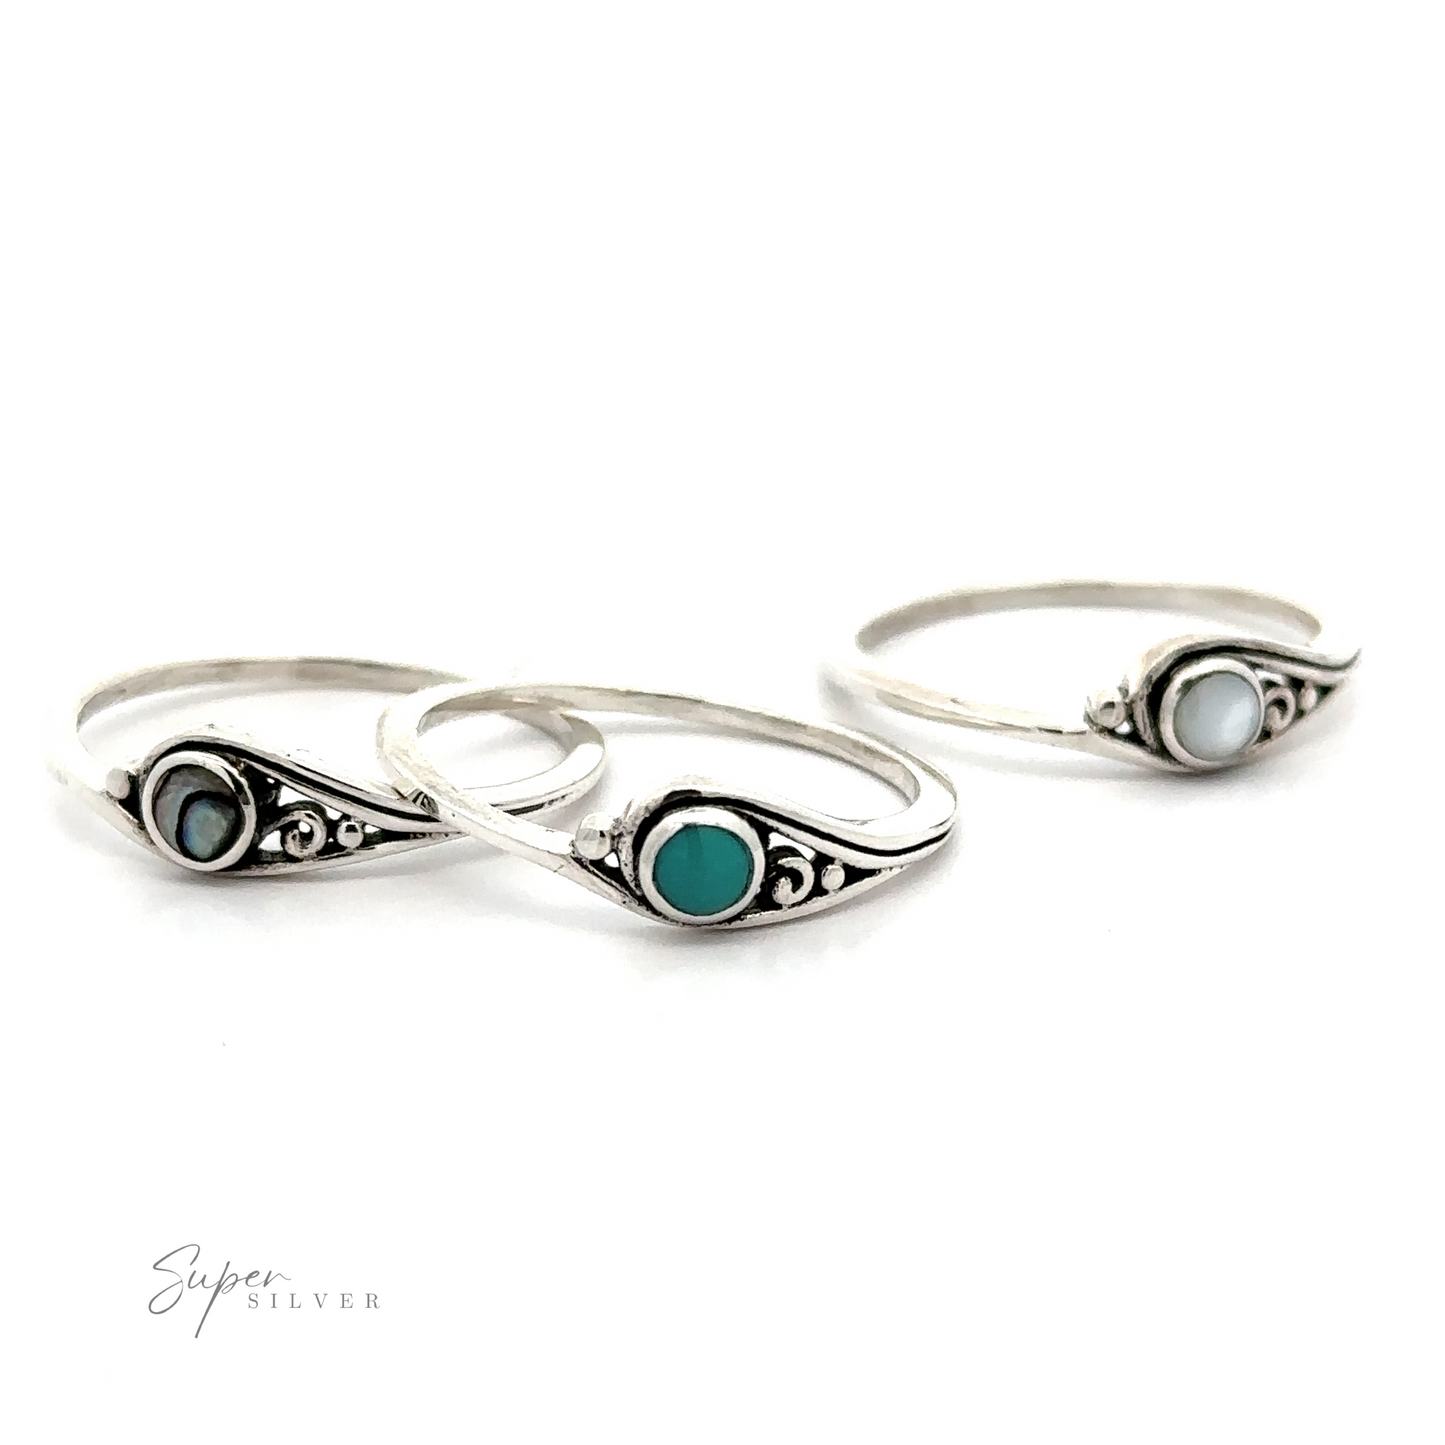 Three Delicate Inlay Stone Rings with Small Swirl Design in sterling silver.